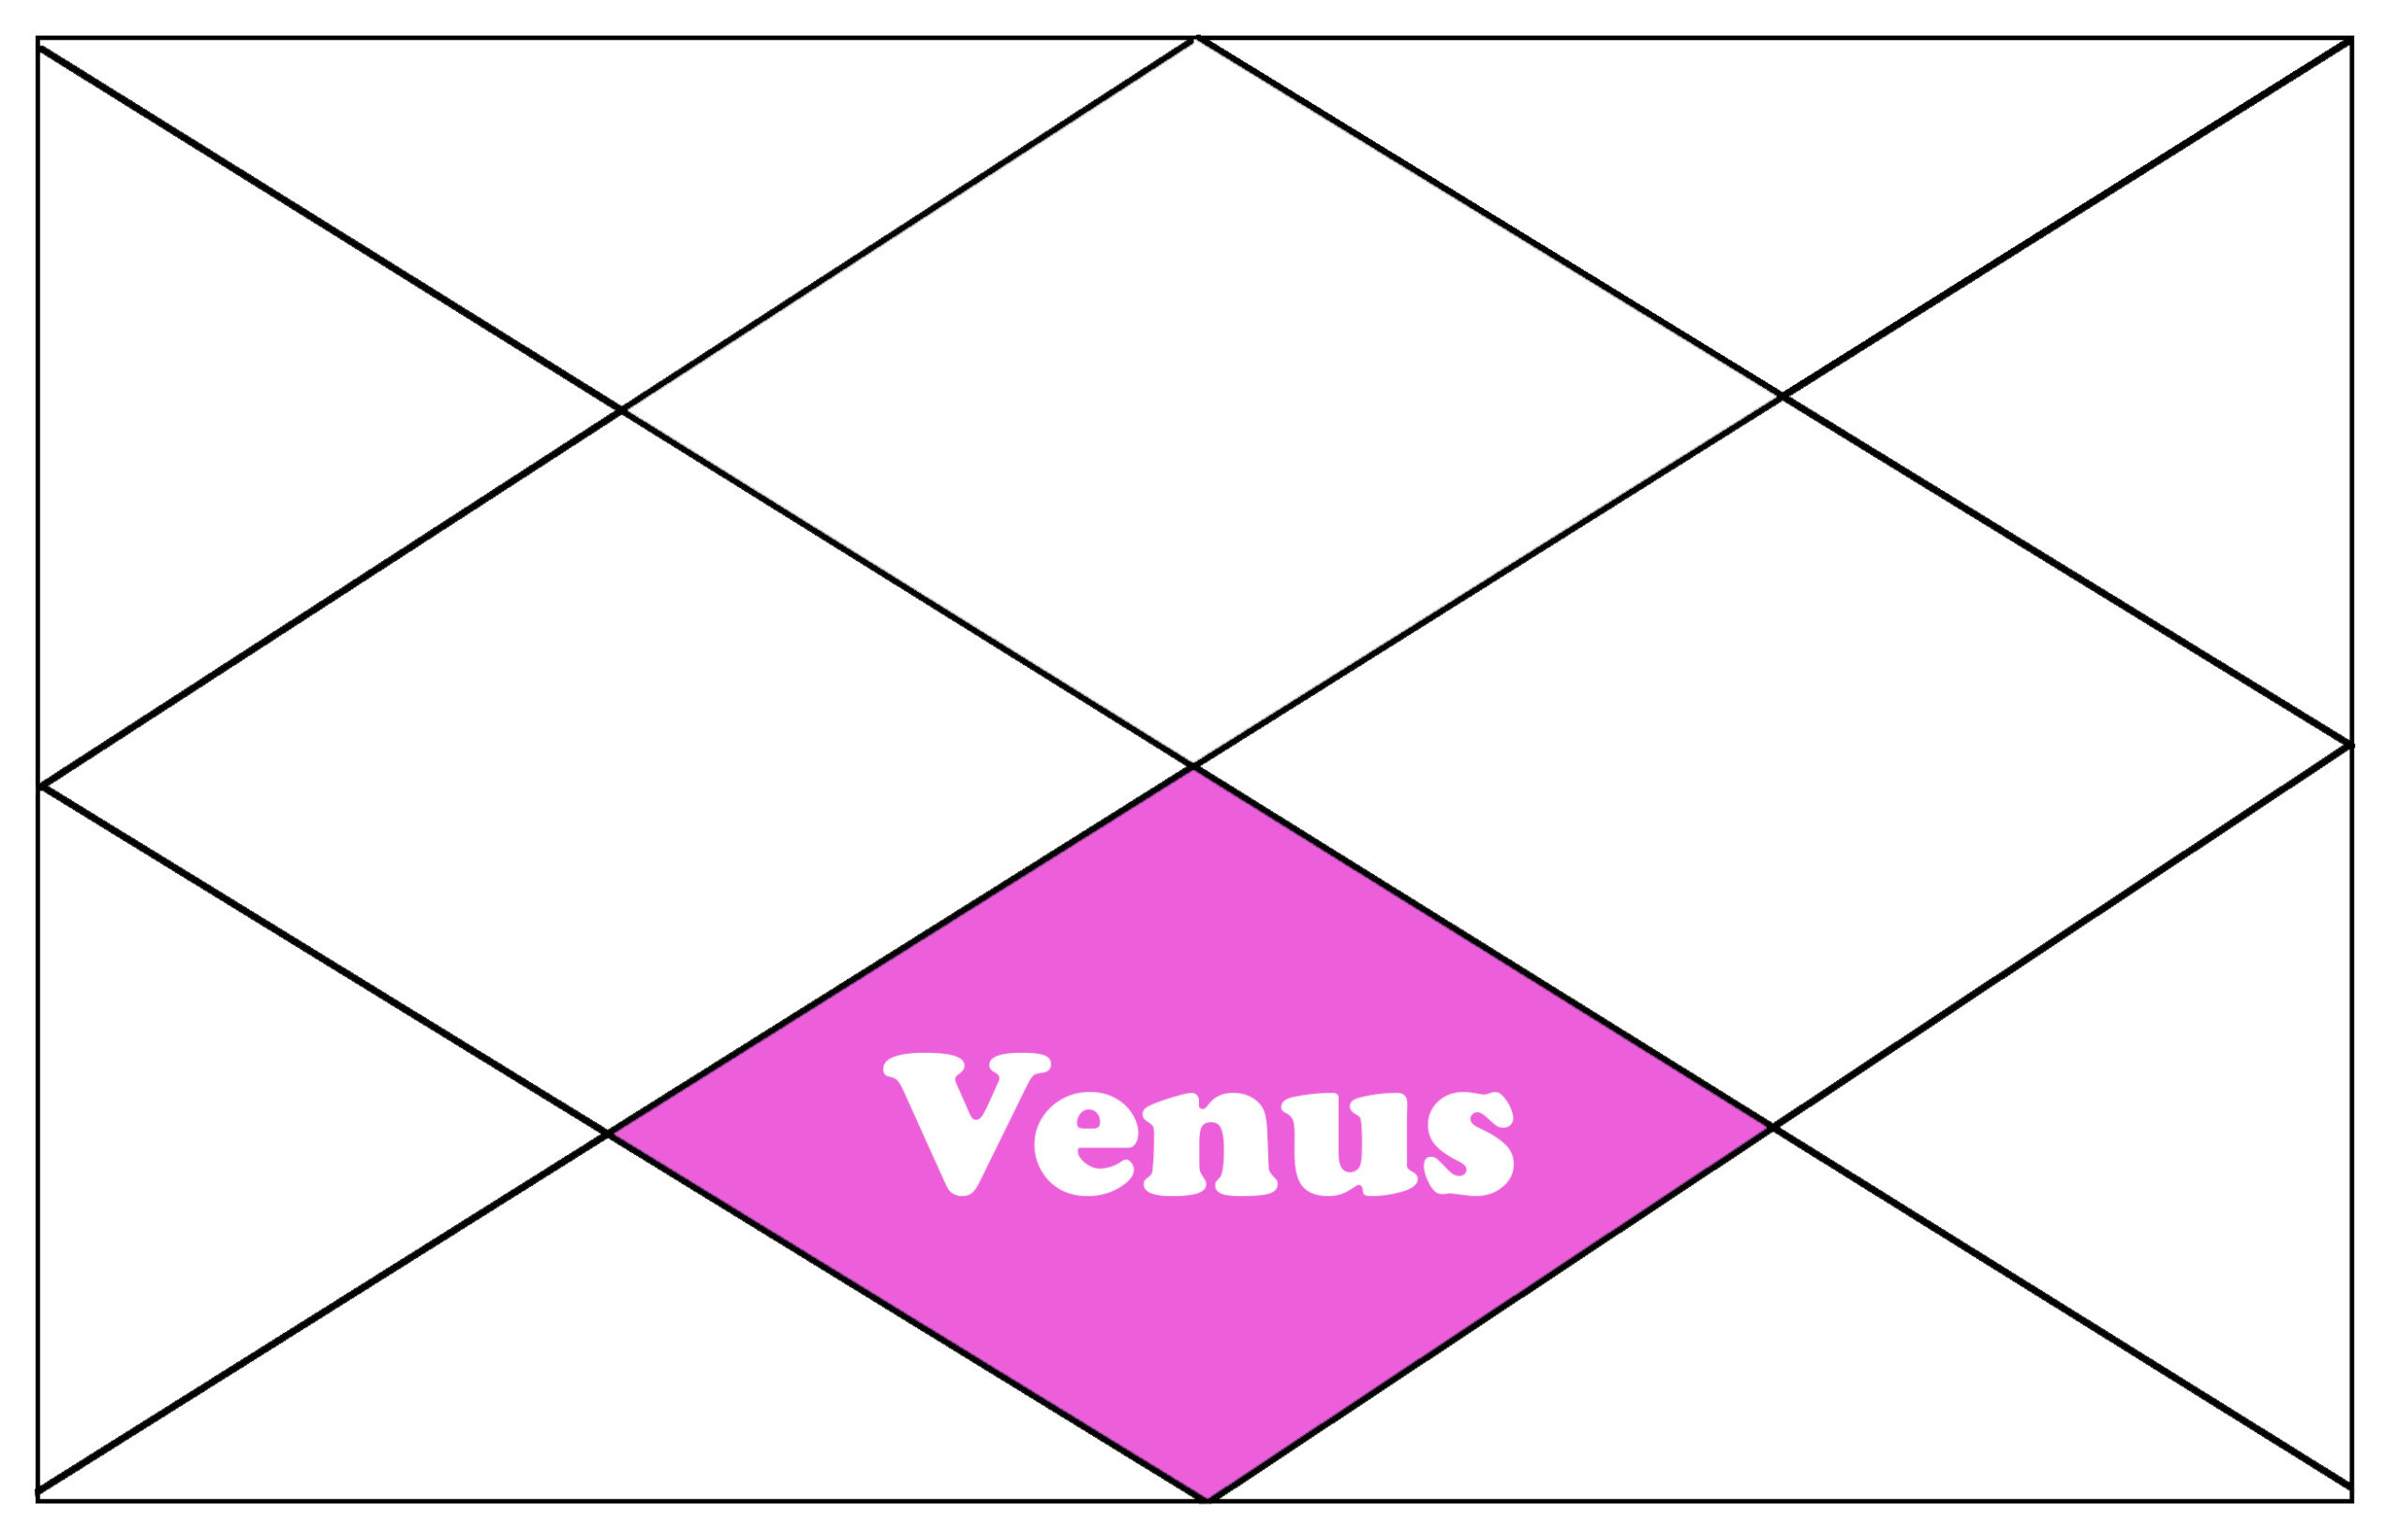 Venus in the 7th house